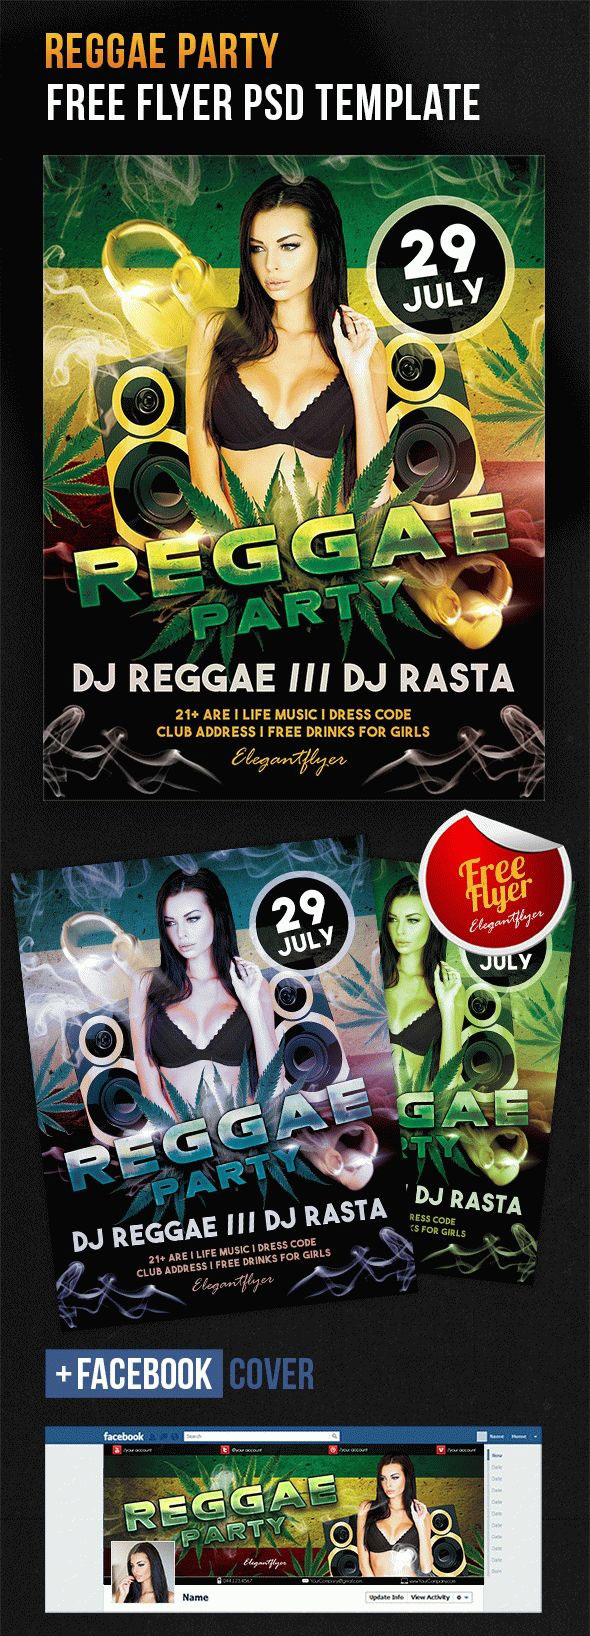 Hip Hop Smoky Reggae Party Flyer Template with a Facebook Cover